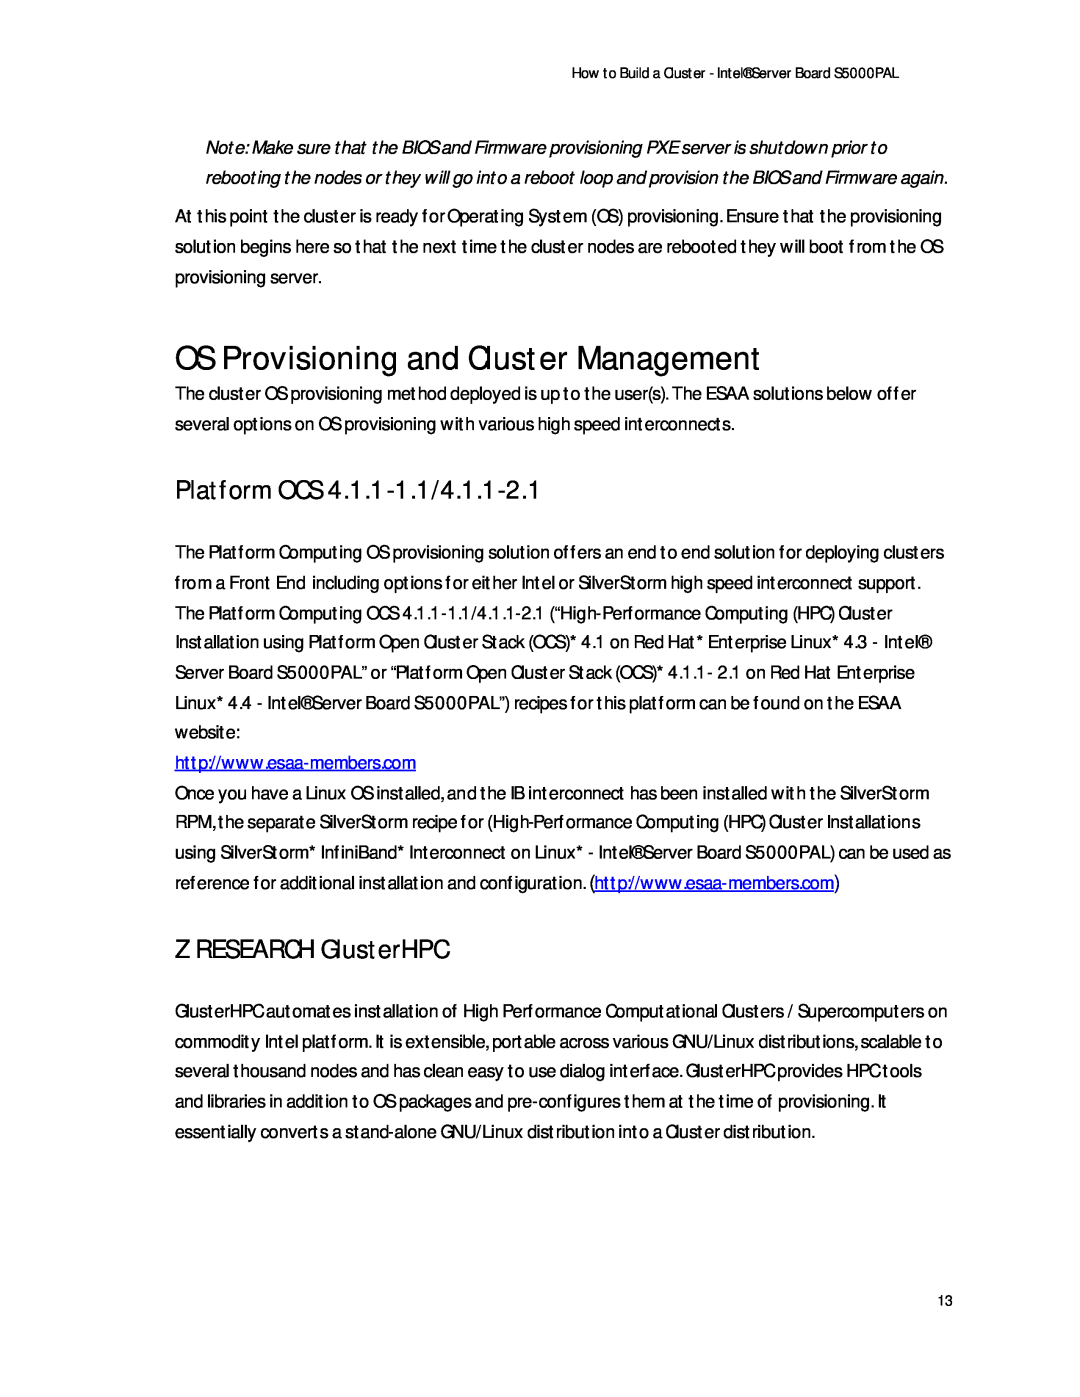 Intel S5000PAL manual OS Provisioning and Cluster Management, Platform OCS 4.1.1-1.1/4.1.1-2.1, Z RESEARCH GlusterHPC 